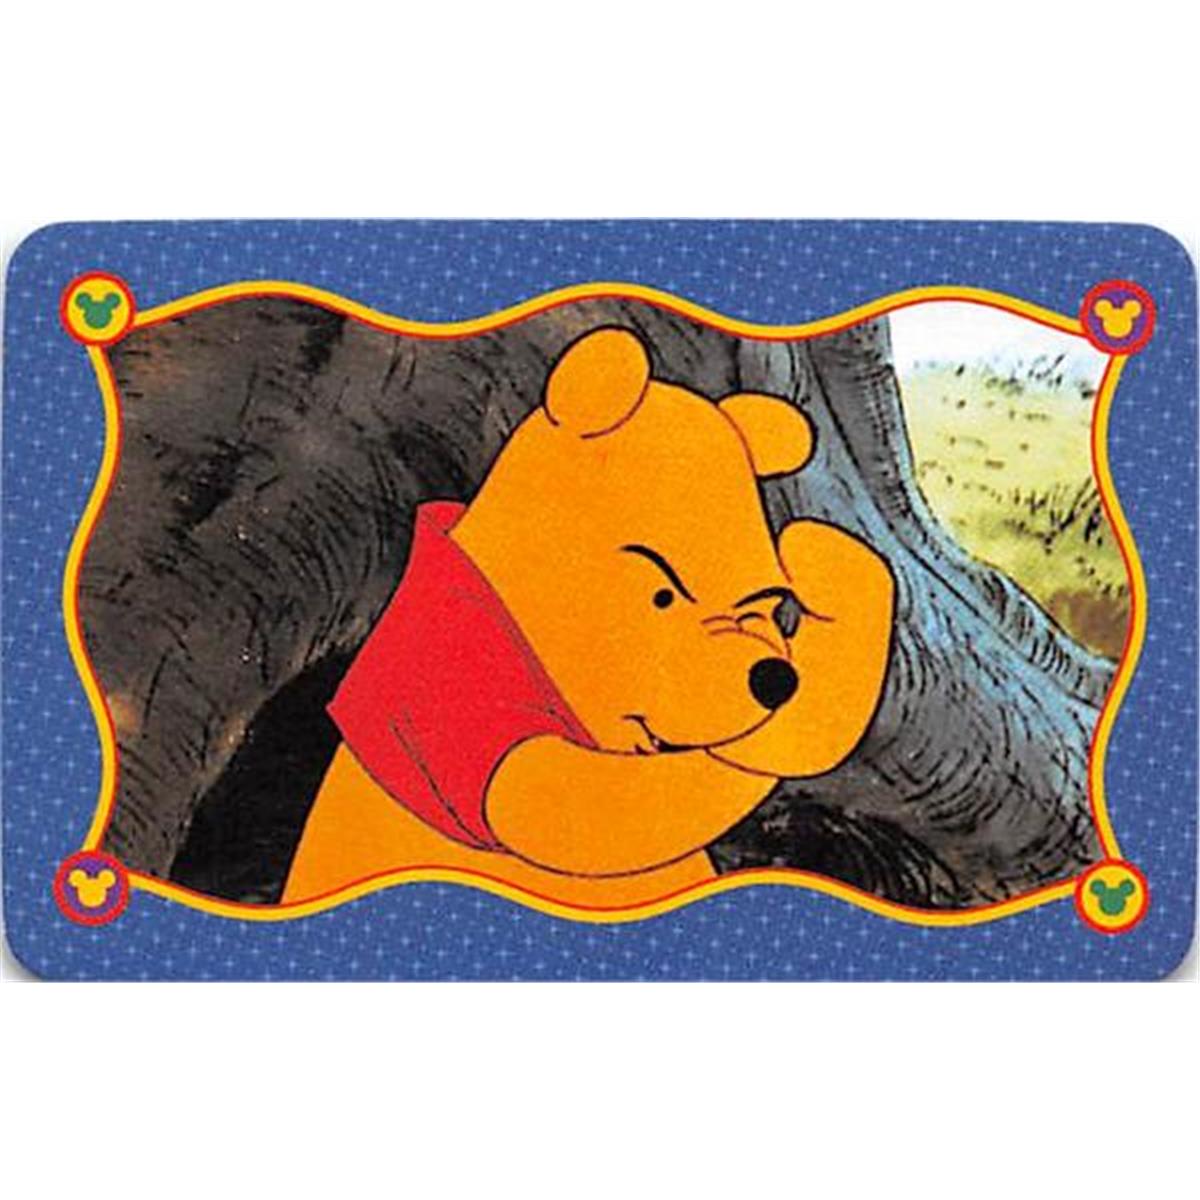 Picture of Autograph Warehouse 409529 Winnie the Pooh Trading Card - Disney Trivia Game 1999-Very Angry Bad